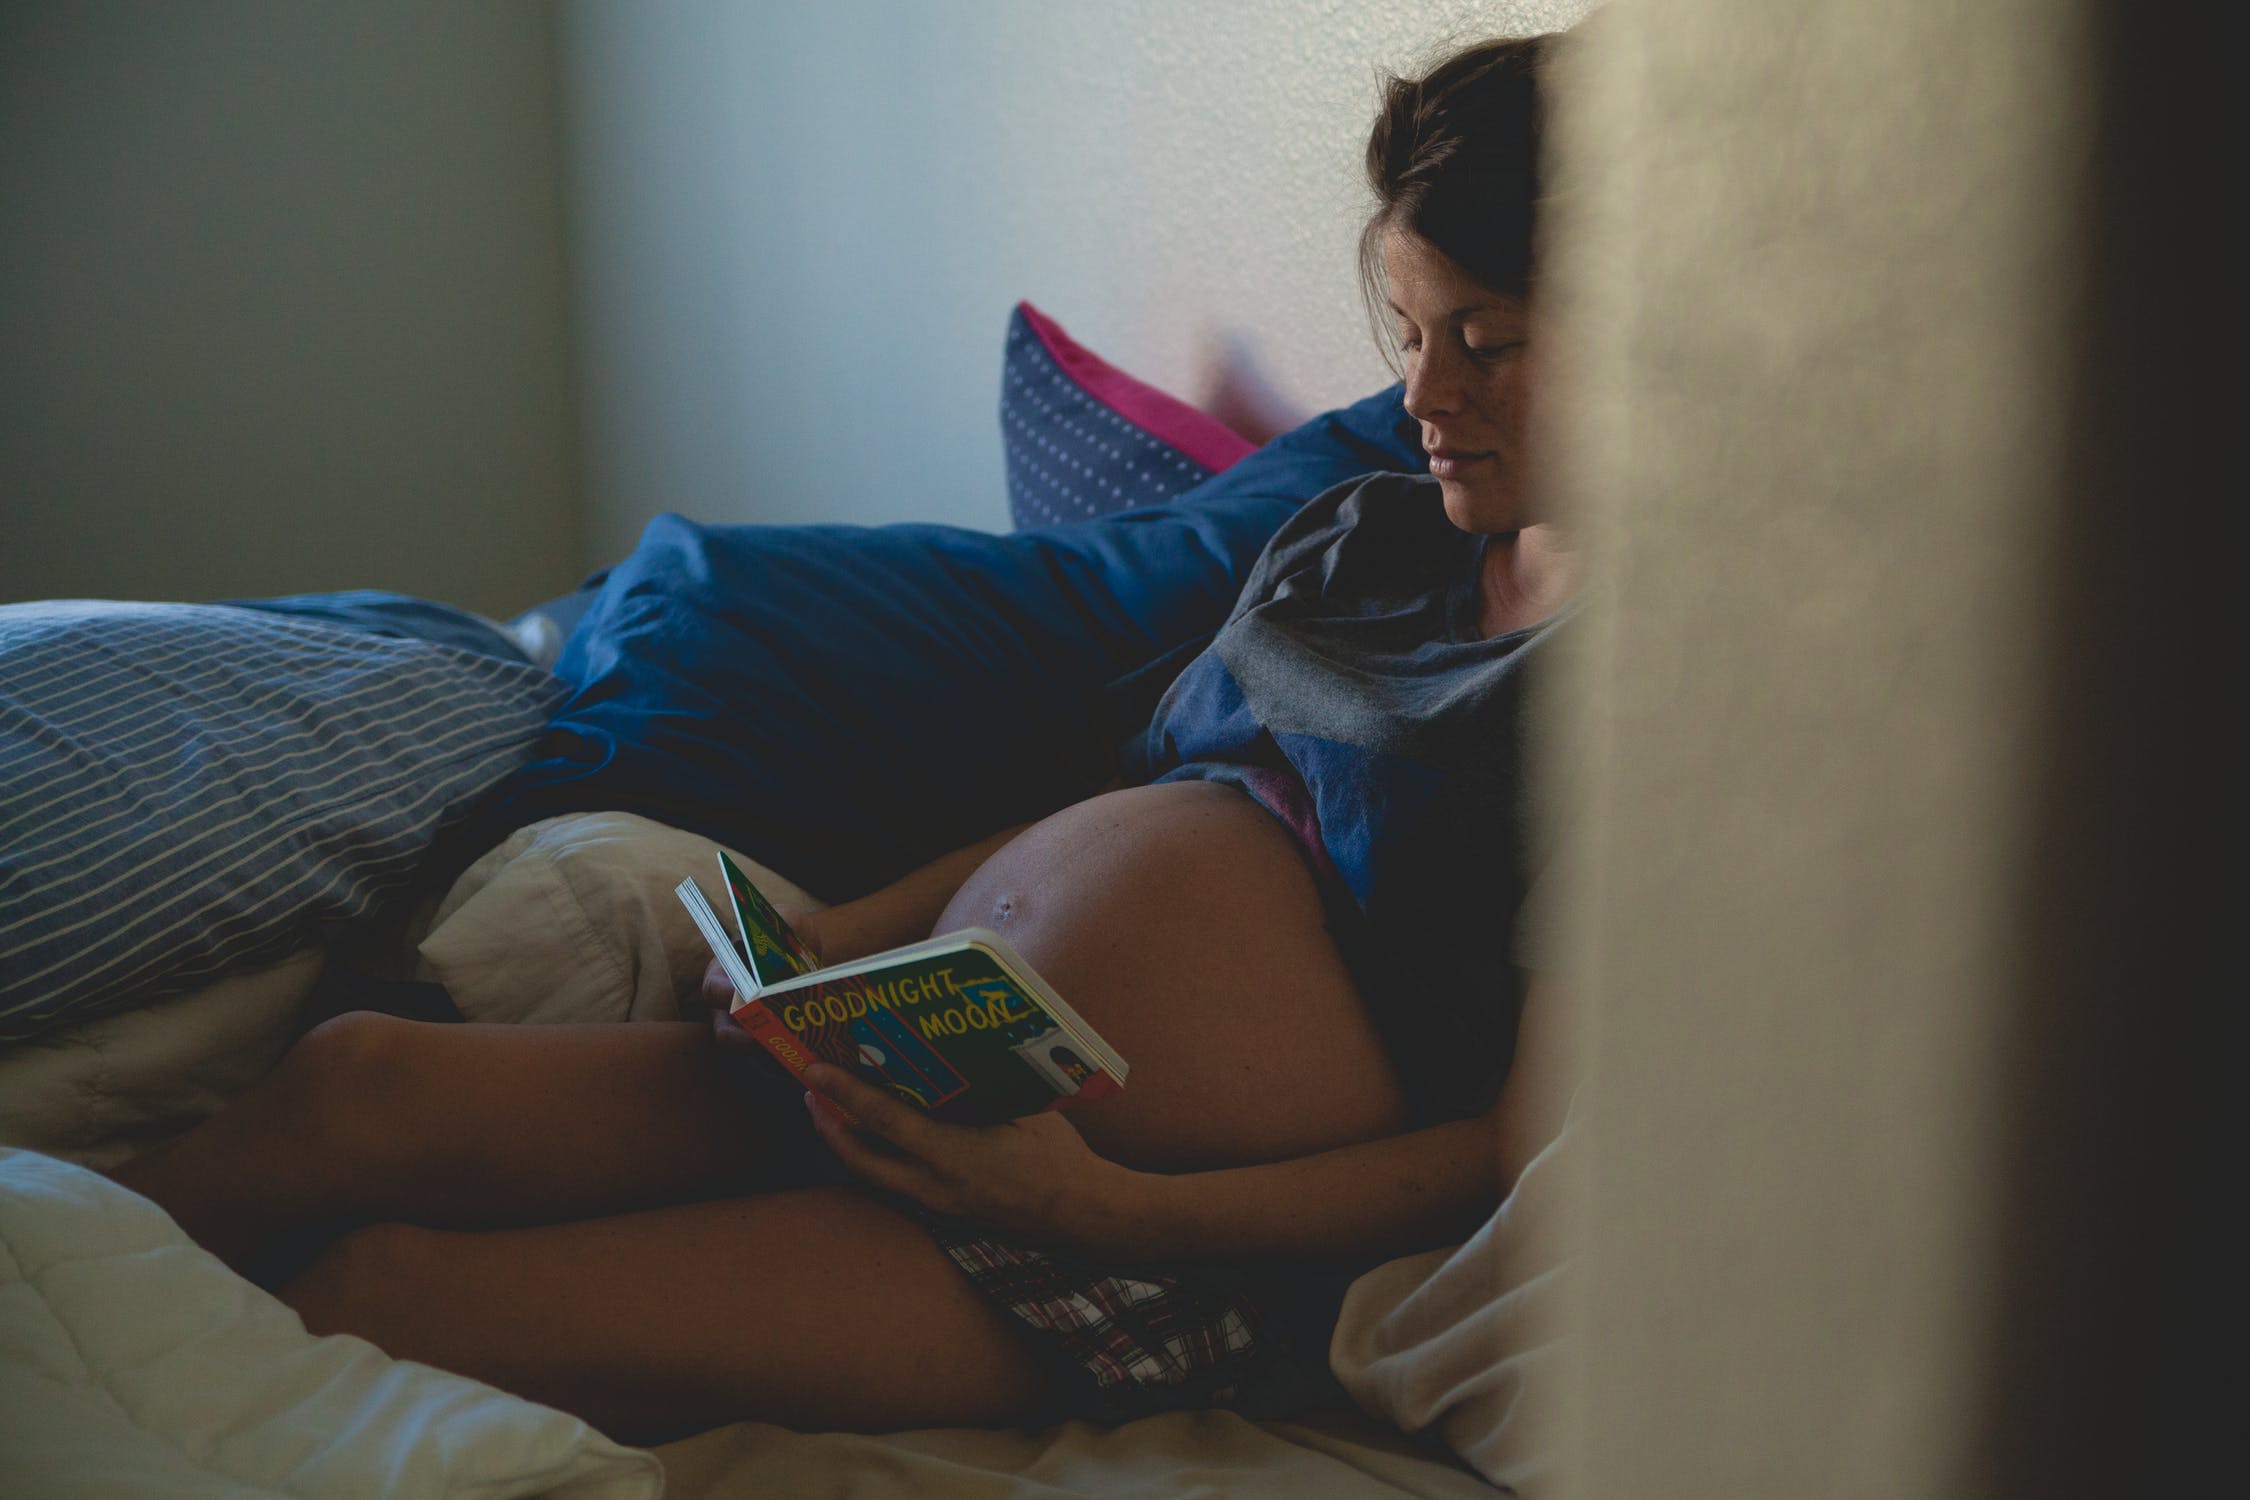 Pregnant woman reading her baby a children's book | Source: Pexels